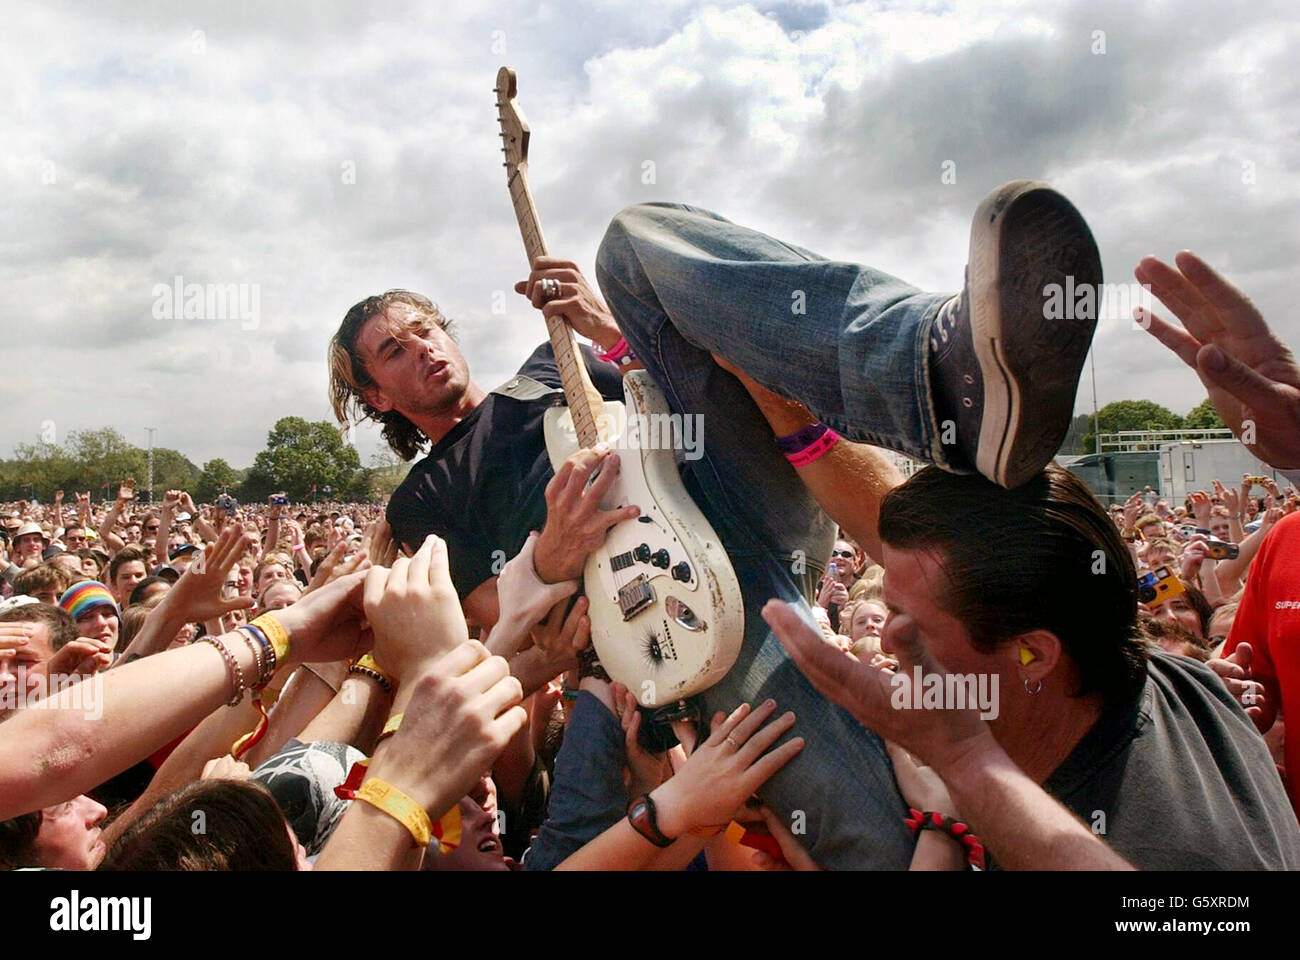 Gavin Rossdale of band, Bush, plays in the crowd at the Glastonbury Festival, at Pilton, Somerset. The festival is a complete sell out, and the weather forecast looks good for the thousands of music fans at the site. Stock Photo